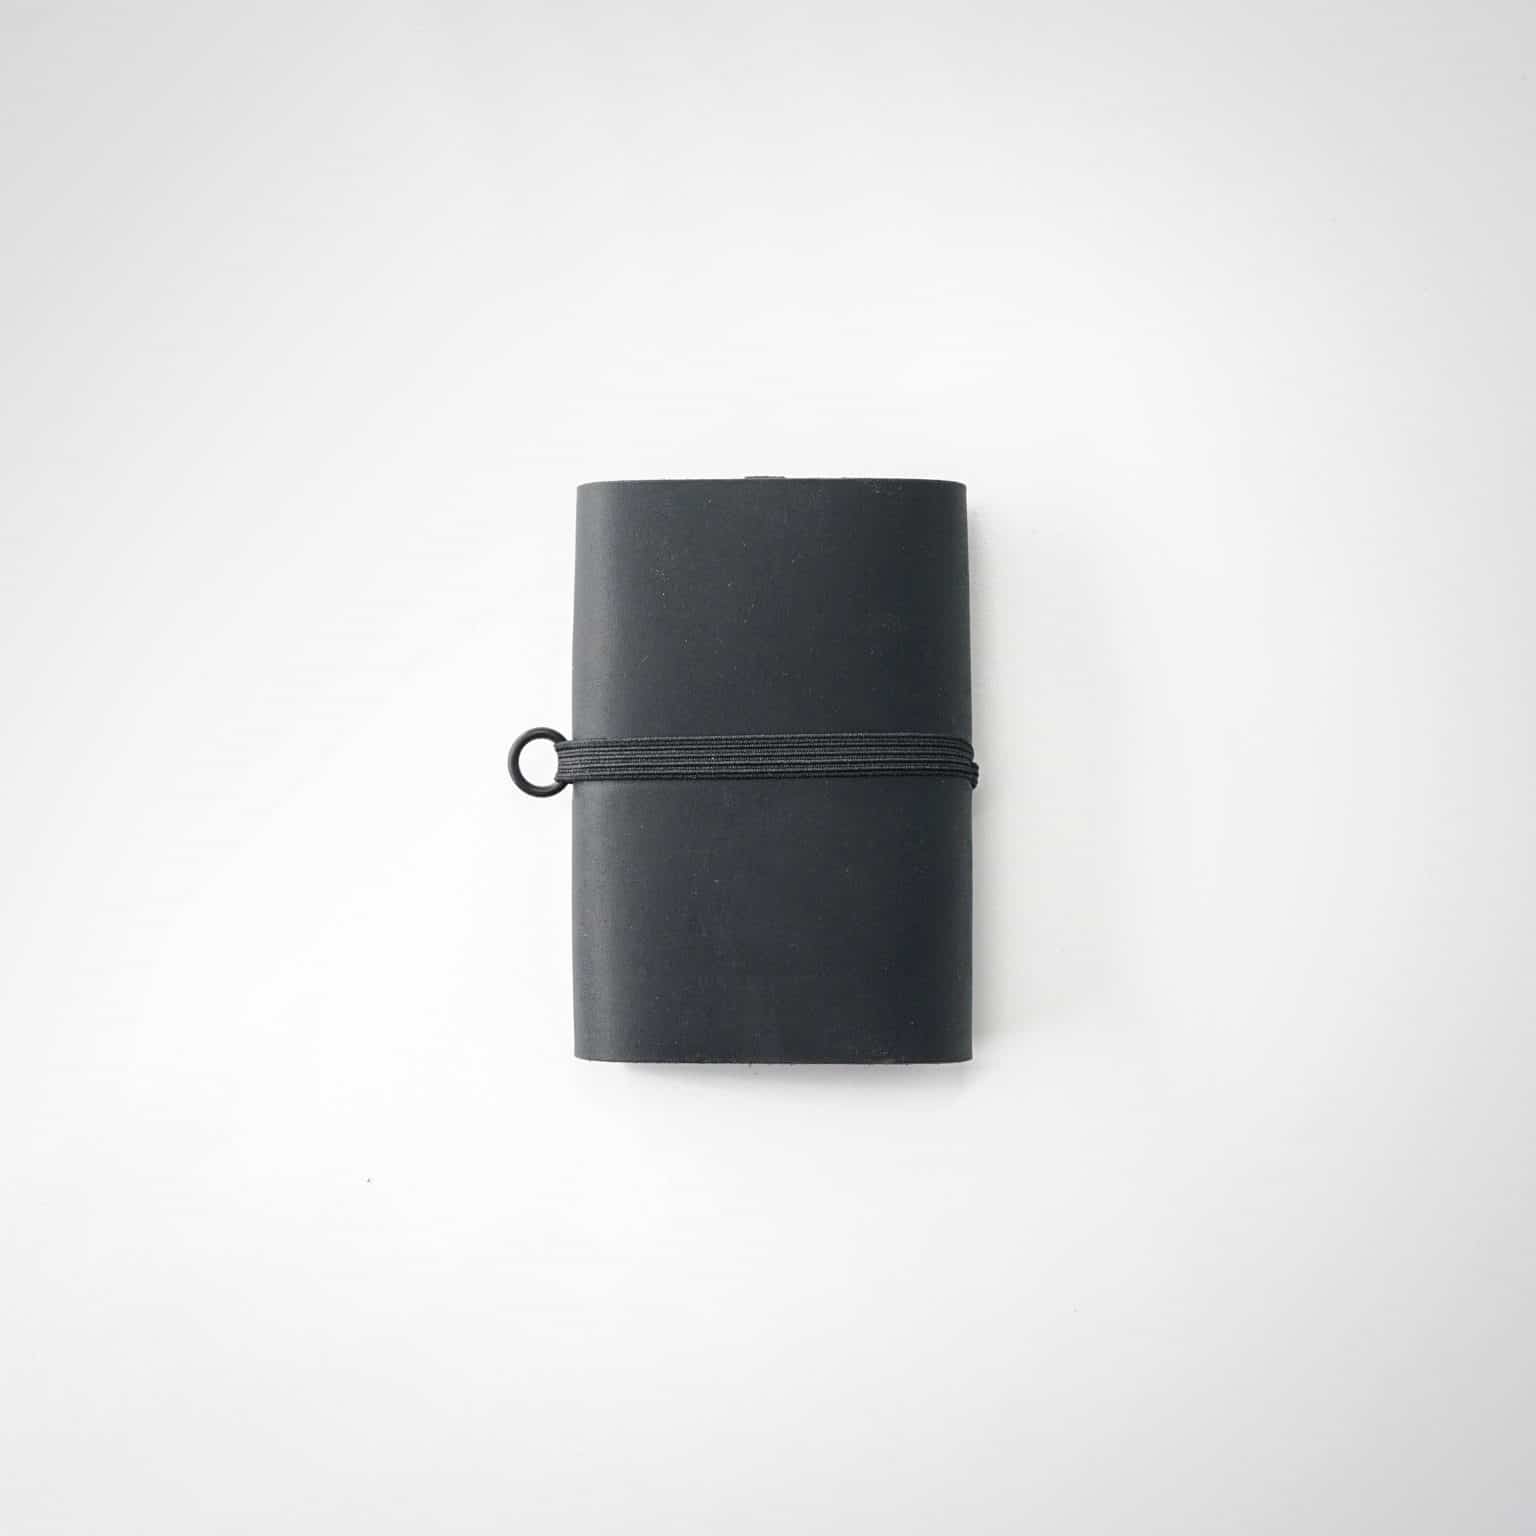 Slim wallet with a focus on eco-friendly materials.